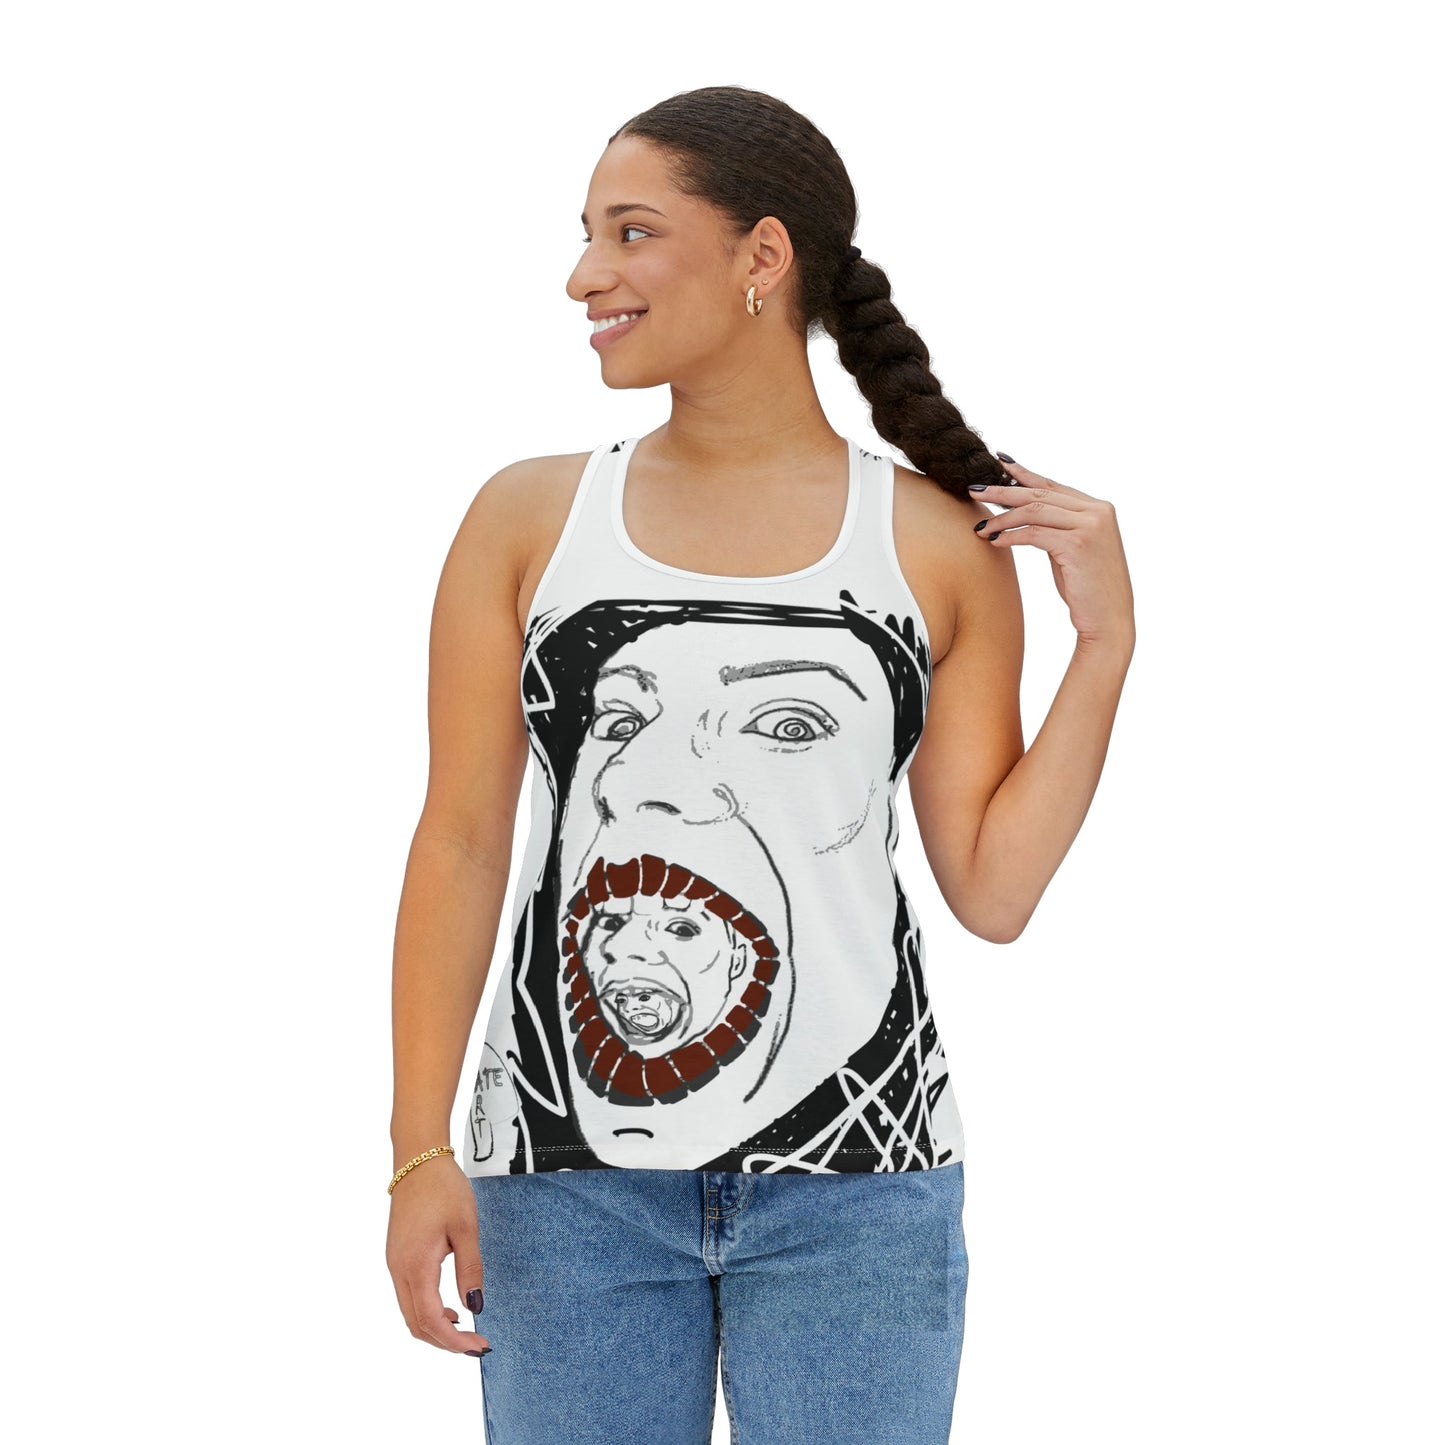 "Eating heads" Tank Top - White